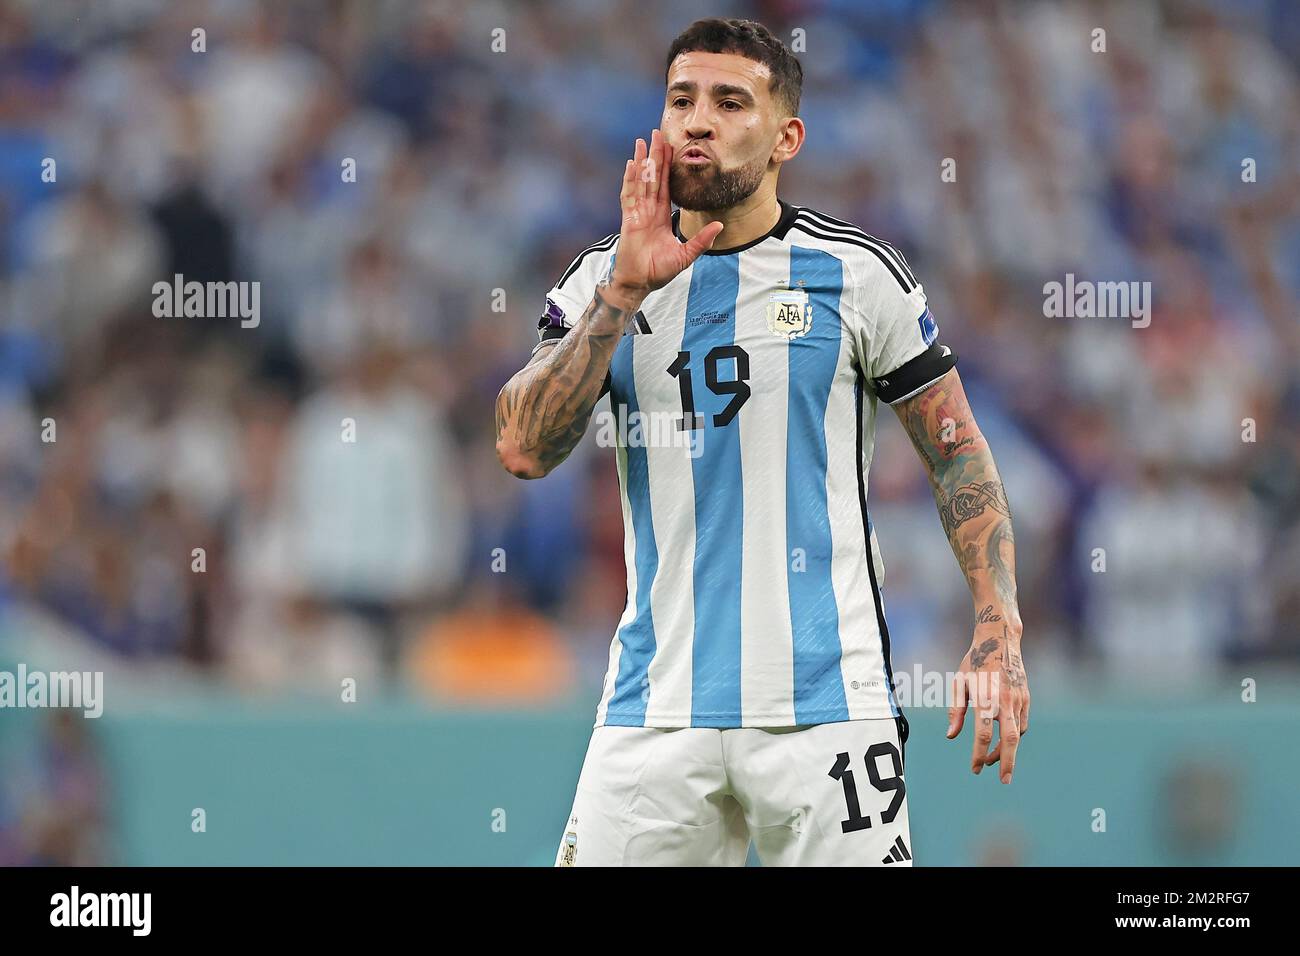 Nicolas Otamendi of Argentina during the FIFA World Cup Qatar 2022 match, Semi-final between Argentina and Croatia played at Lusail Stadium on Dec 13, 2022 in Lusail, Qatar. (Photo by Heuler Anbdrey / DiaEsportivo / PRESSIN) Stock Photo